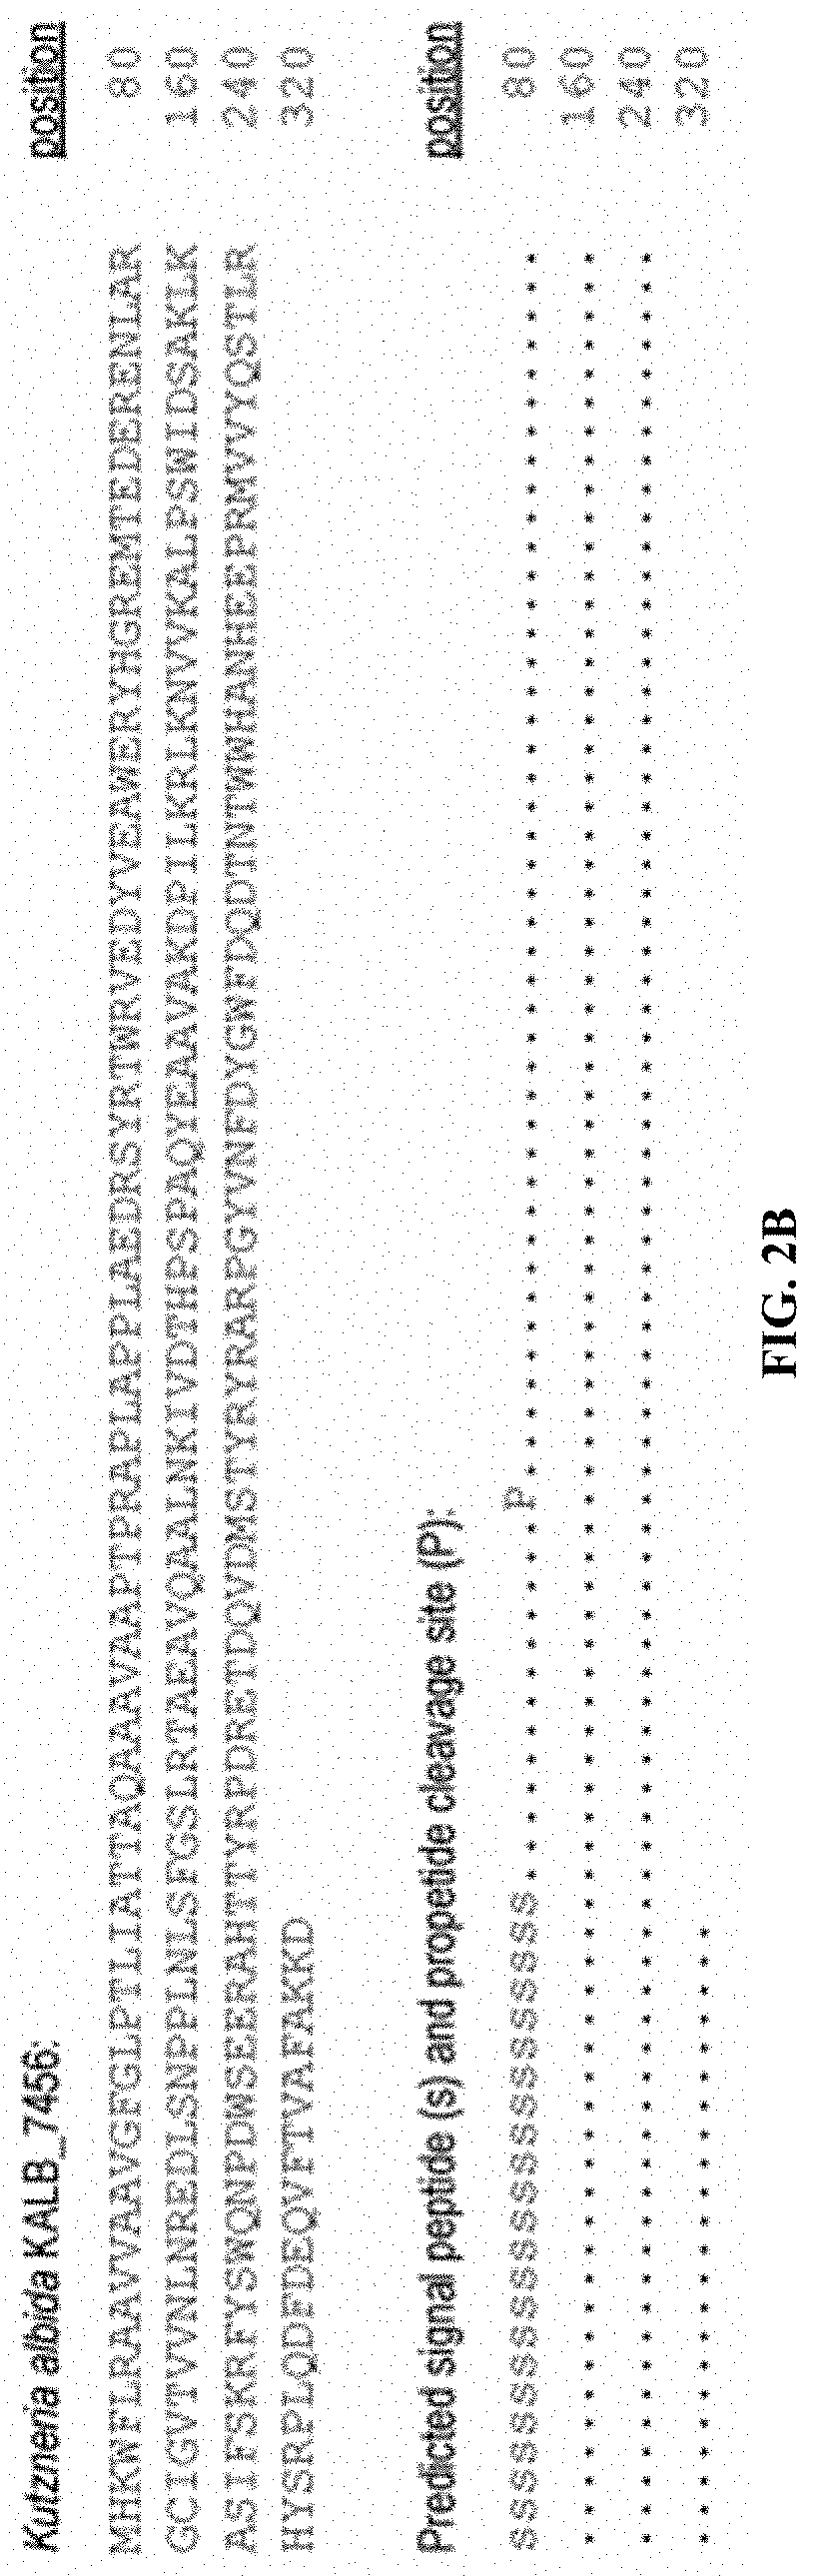 System and method for identification and characterization of transglutaminase species